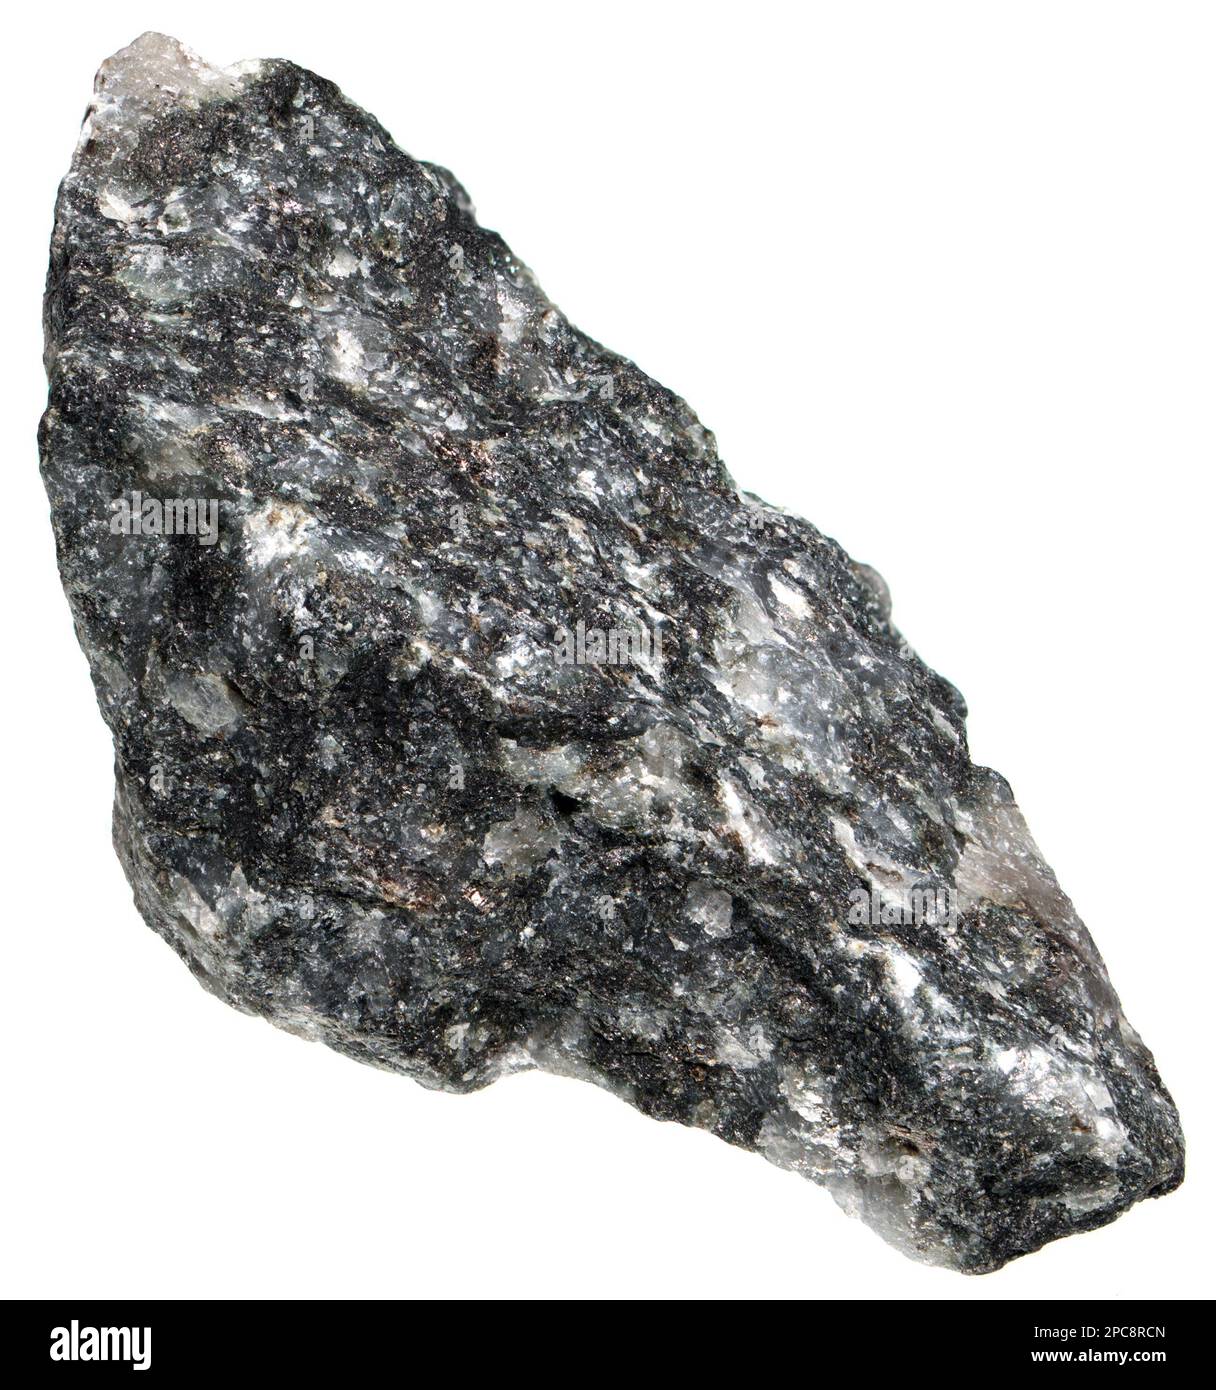 Gabbro - coarse-grained, intrusive igneous rock formed from the slow cooling of magnesium-rich and iron-rich magma (c4cm long) Stock Photo